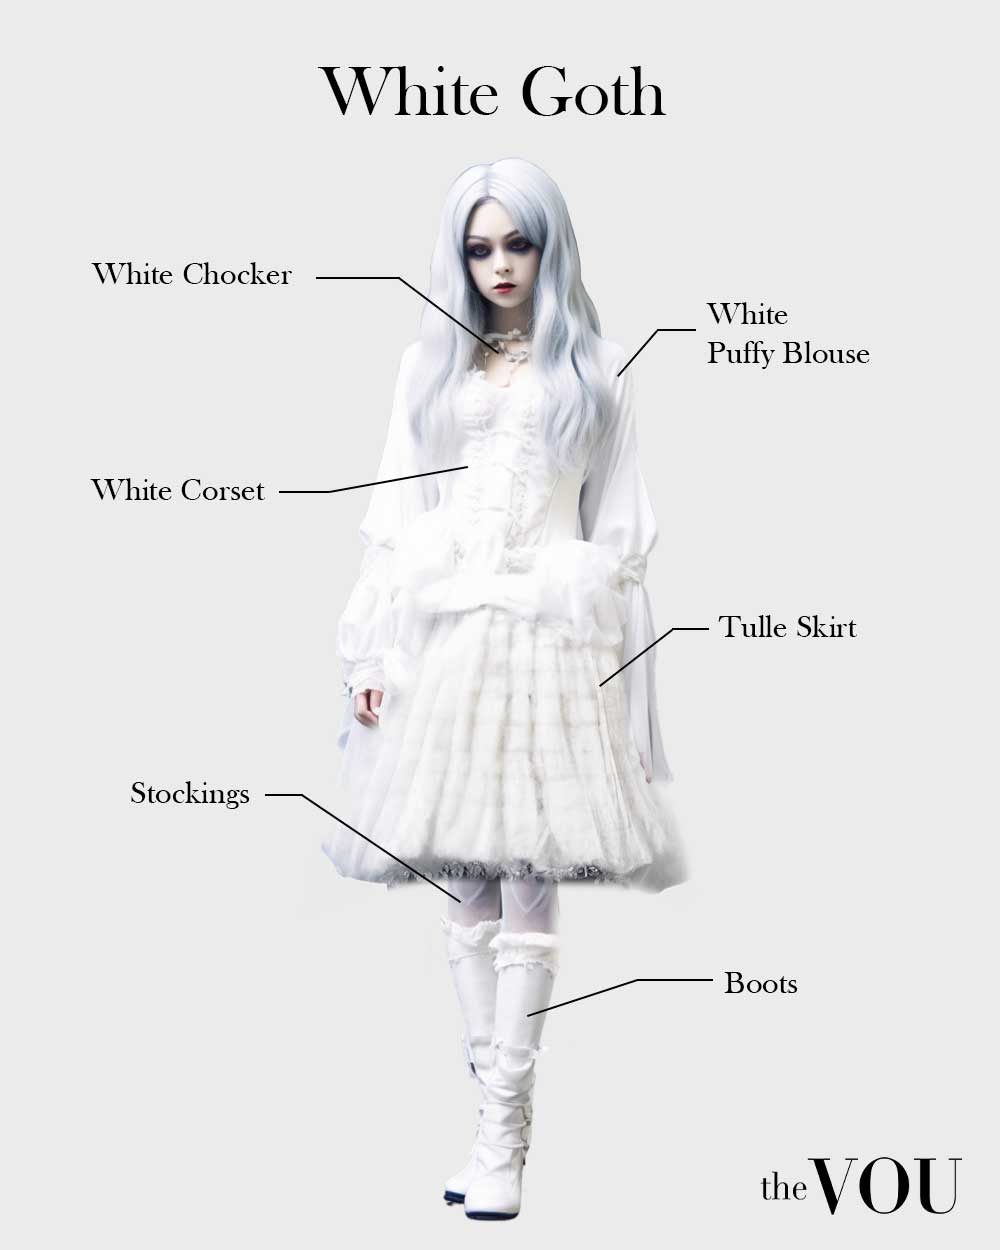 White Goth outfit elements